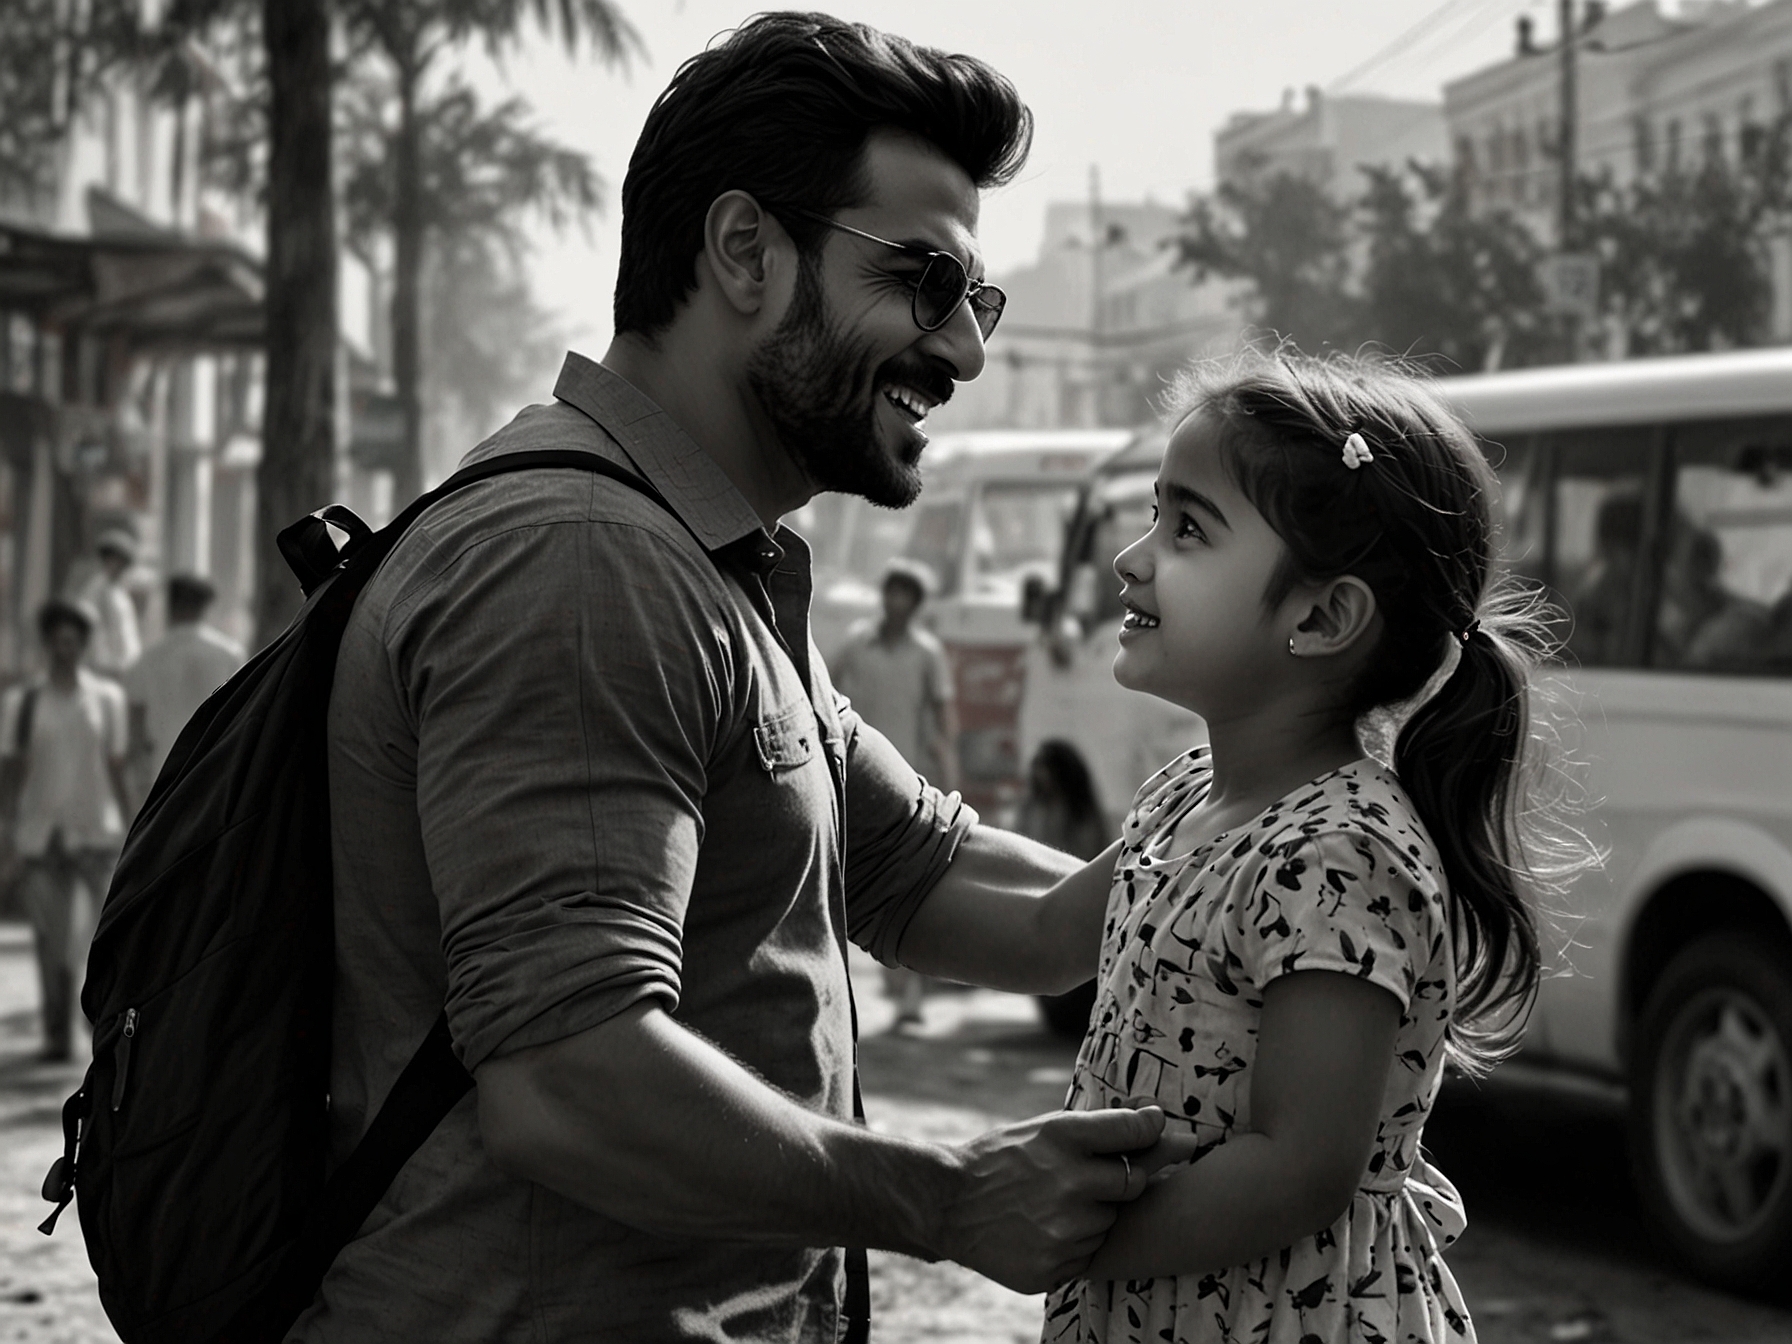 Ram Charan joyfully interacting with his daughter Klin Kaara amidst a busy day, highlighting the depth of their emotional connection.